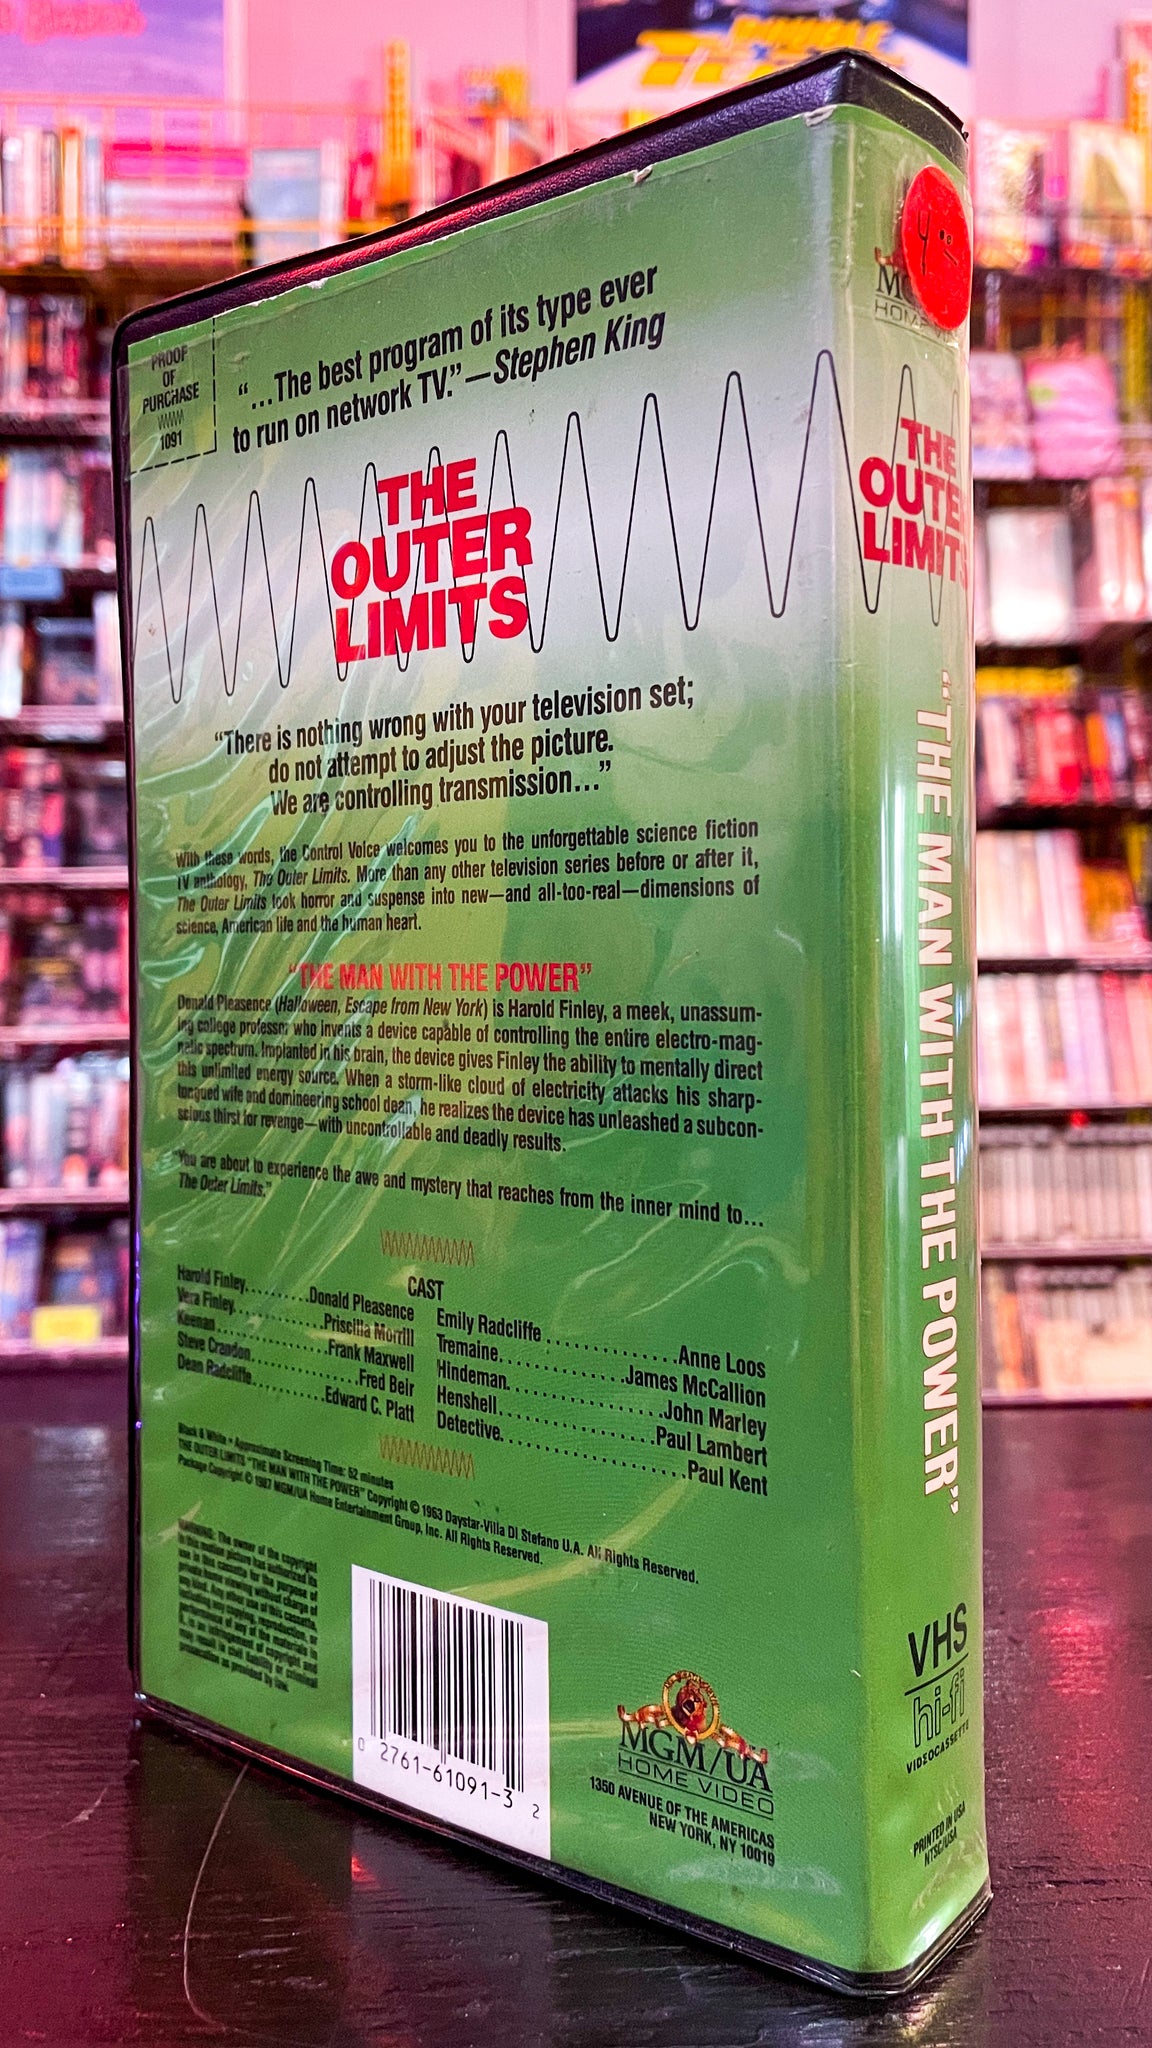 The Outer Limits: "The Man With The Power"